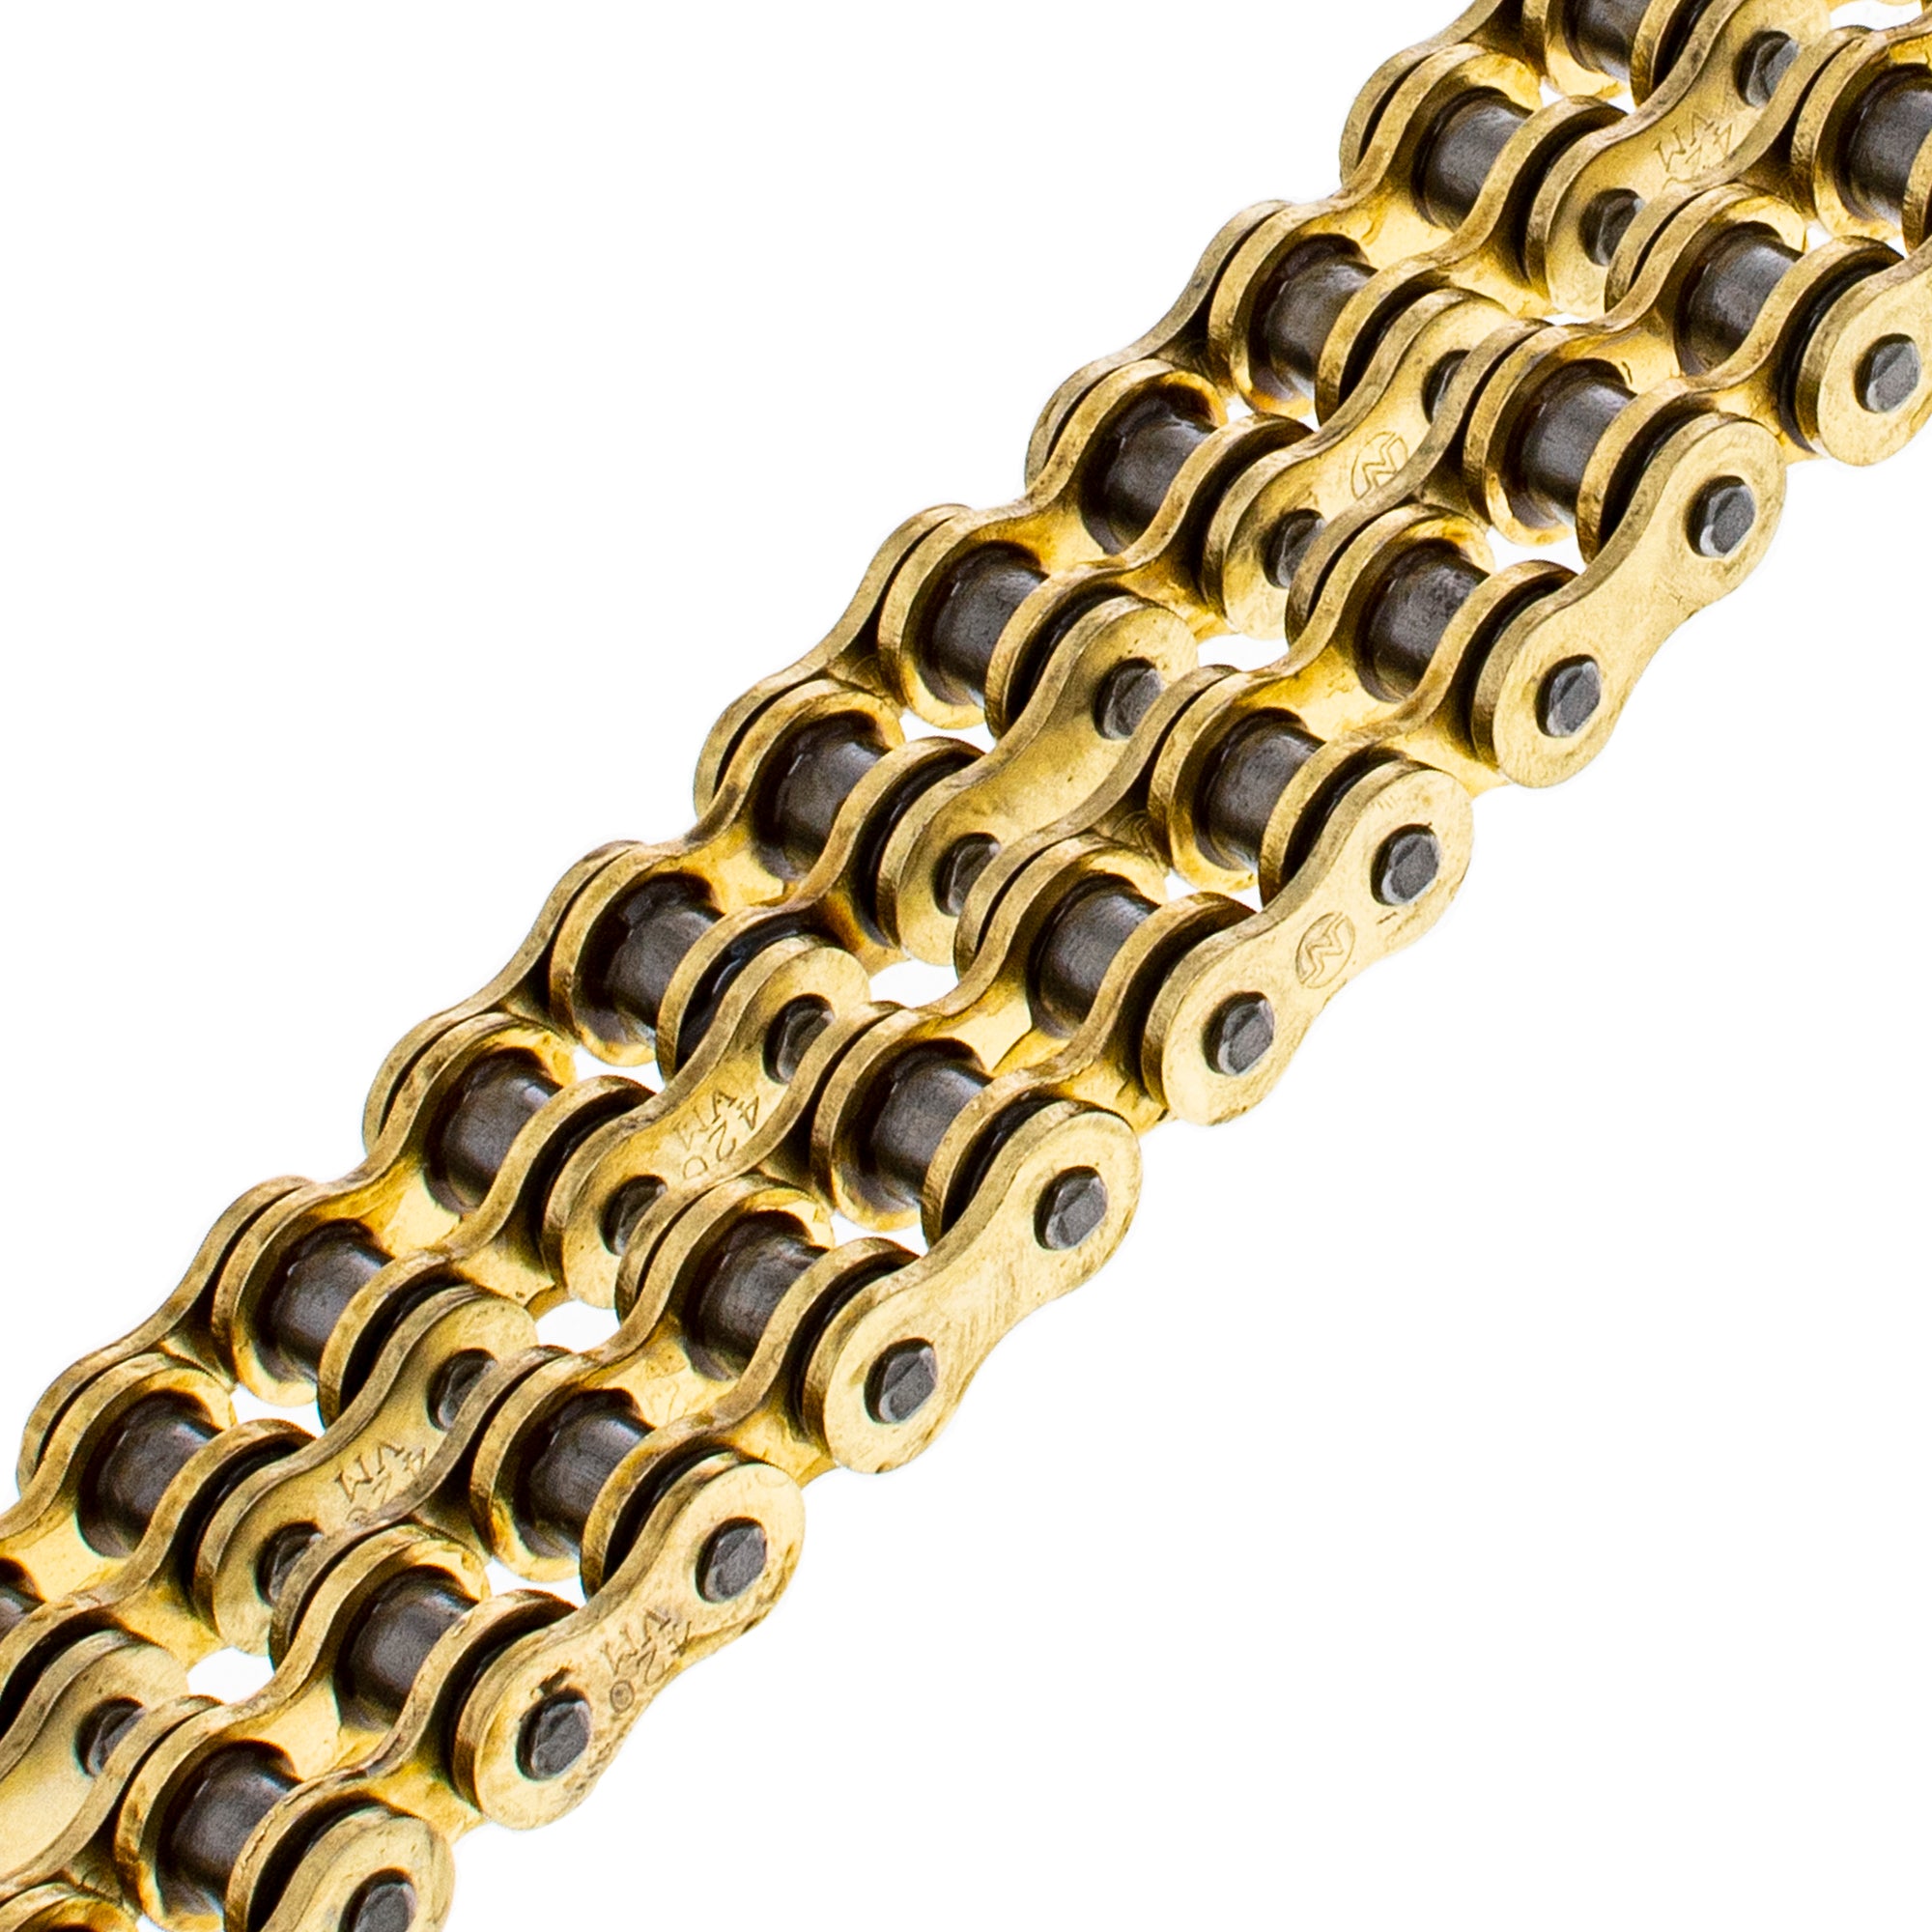 Gold X-Ring Chain 112 w/ Master Link for zOTHER KTM TC65 KX80 DT50 65 5445 46110165112 NICHE 519-CDC2556H